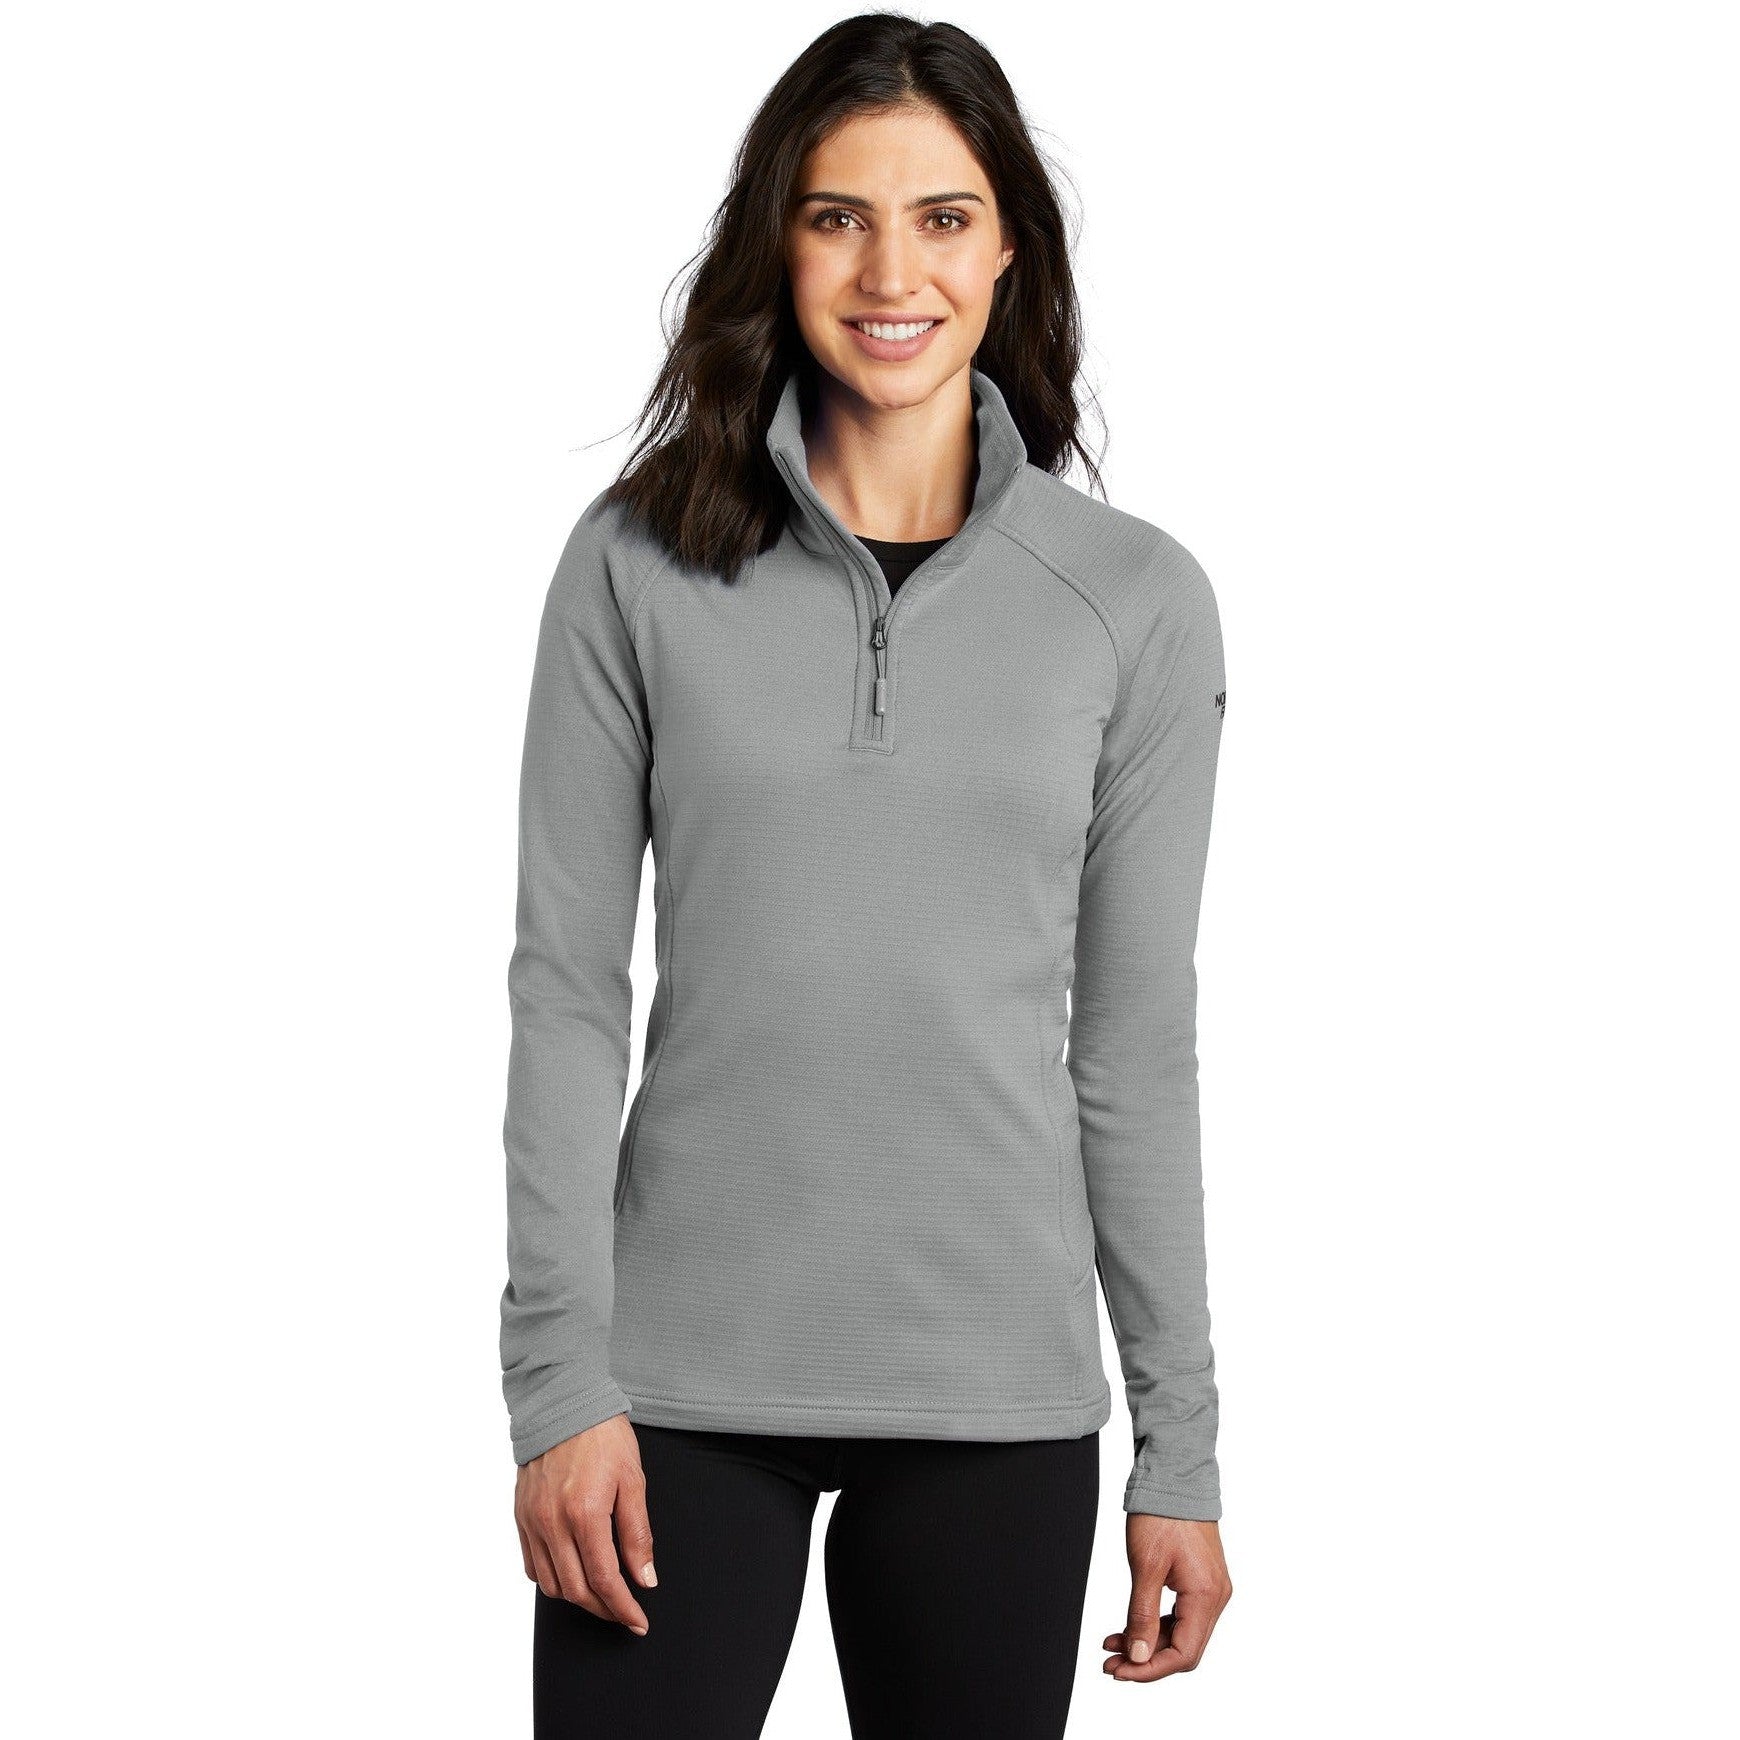 CLOSEOUT - The North Face Ladies Mountain Peaks 1/4-Zip Fleece